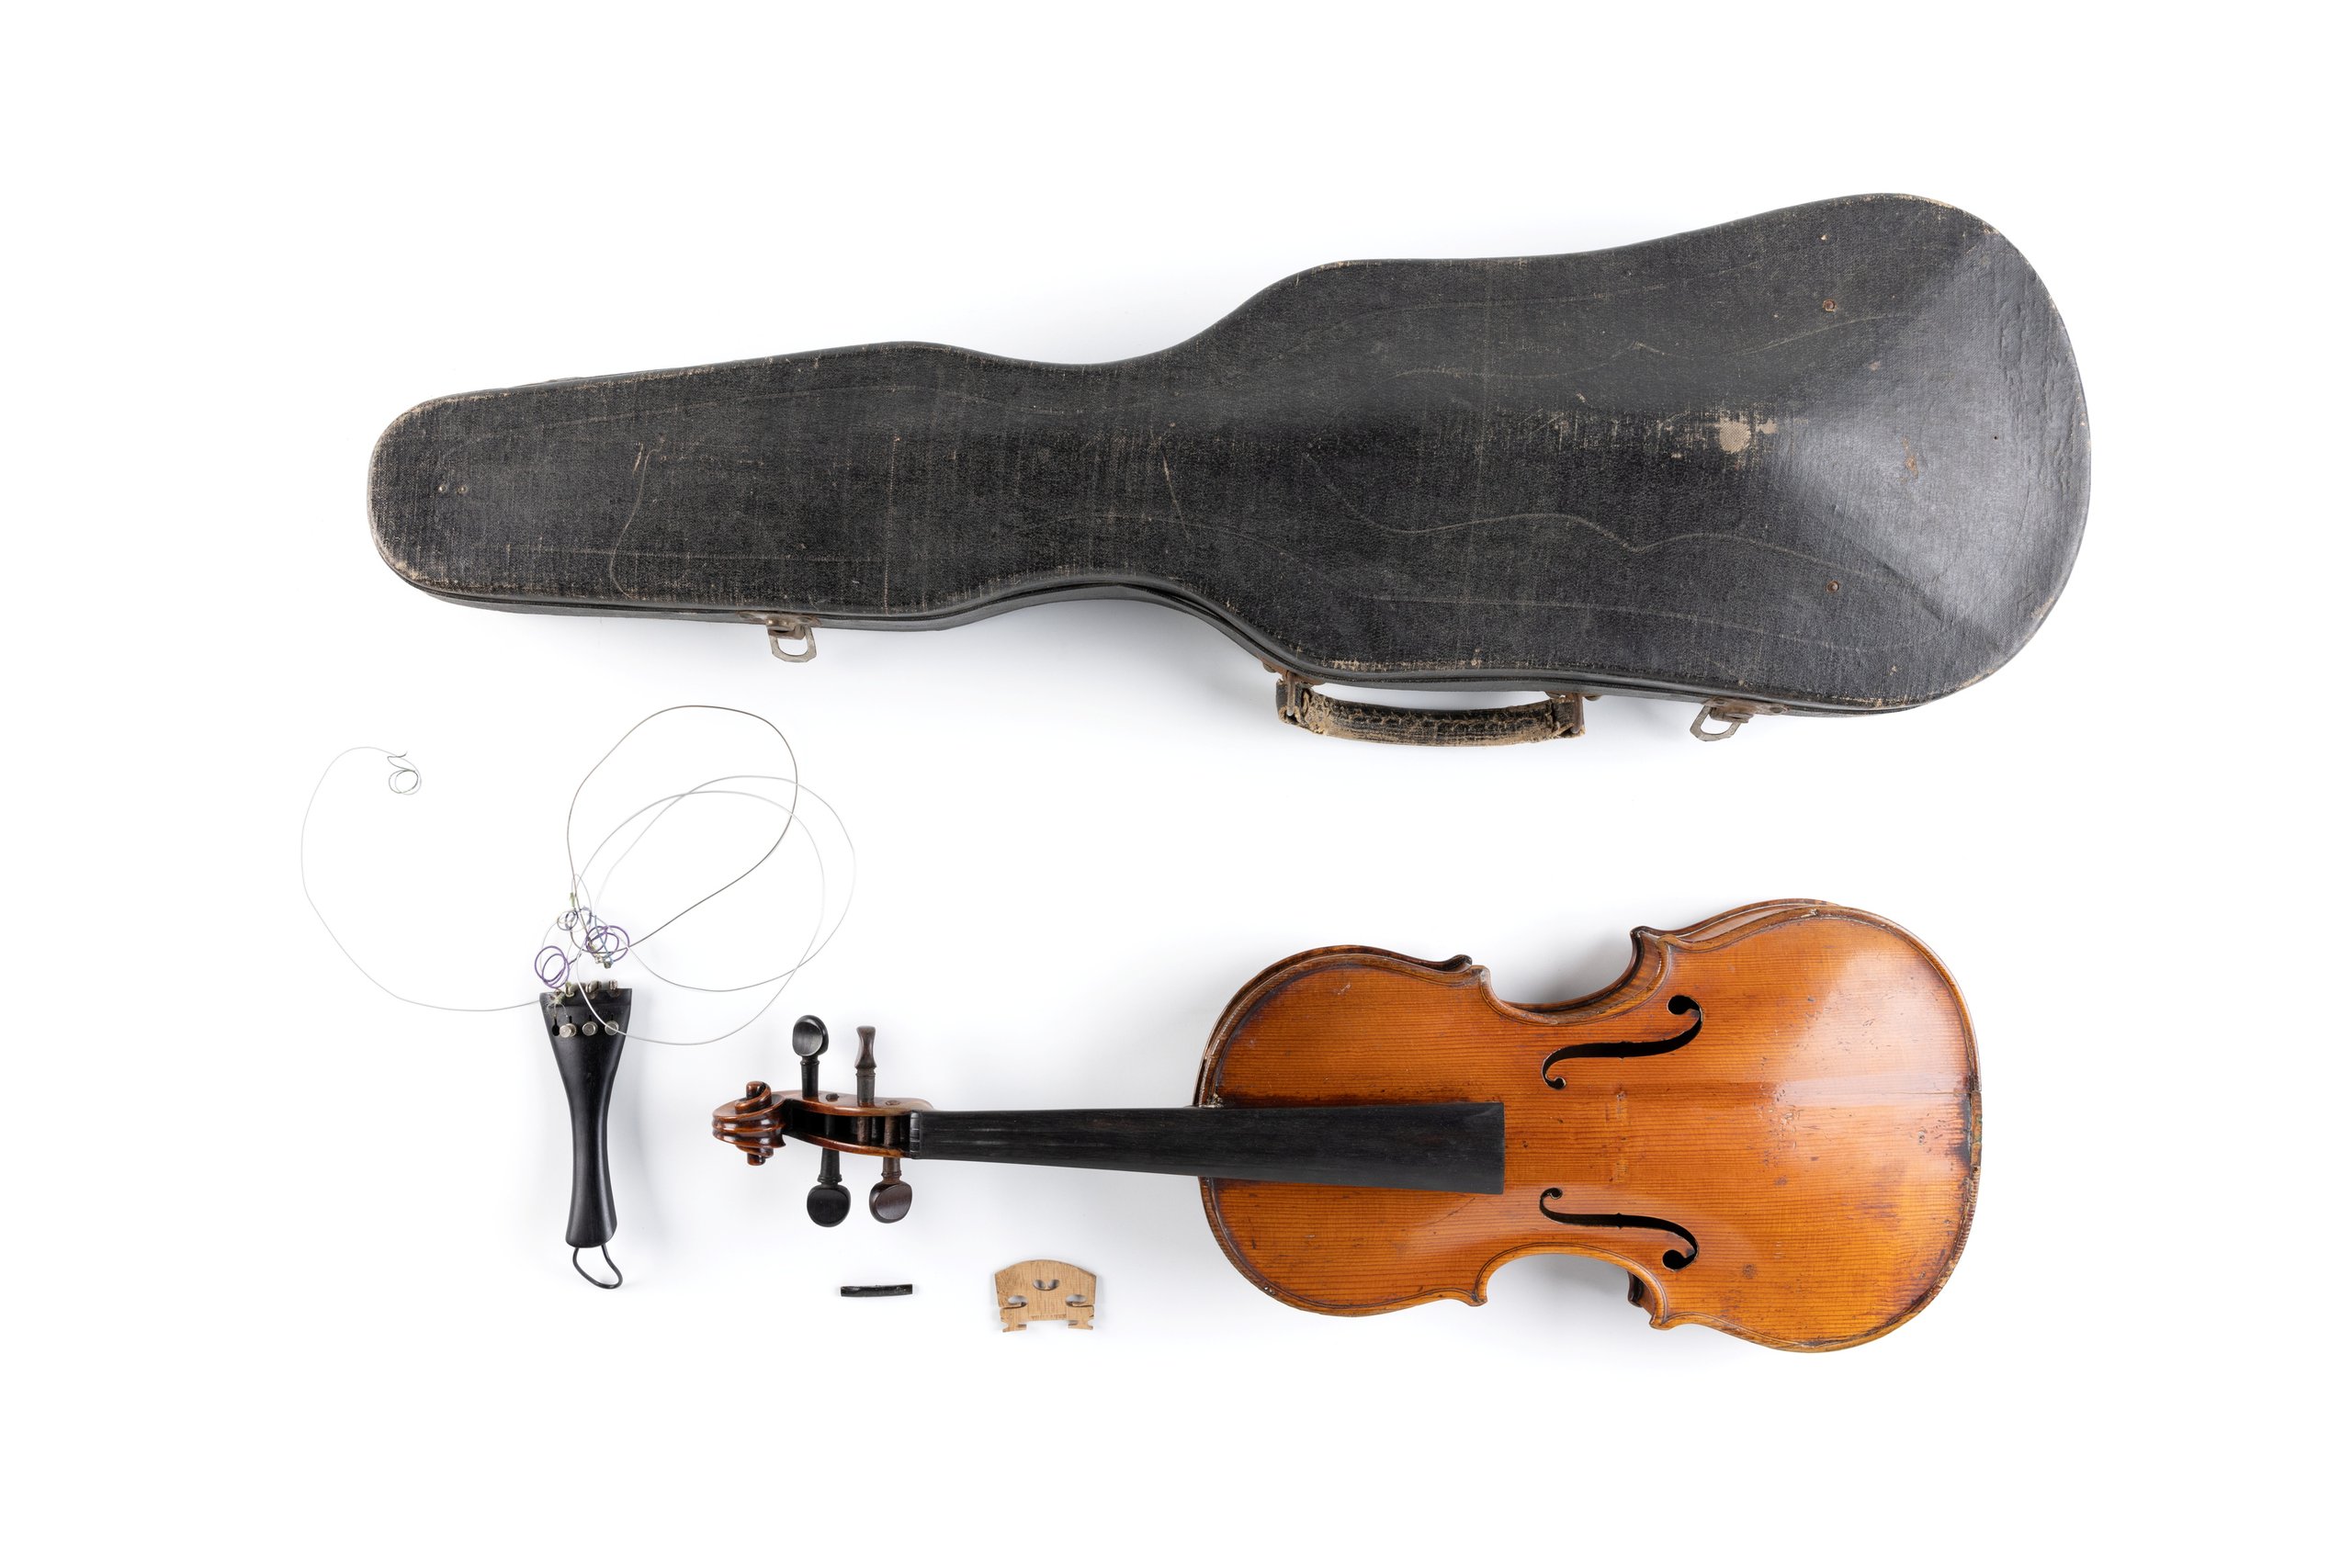 Violin and components in case made by John Devereux